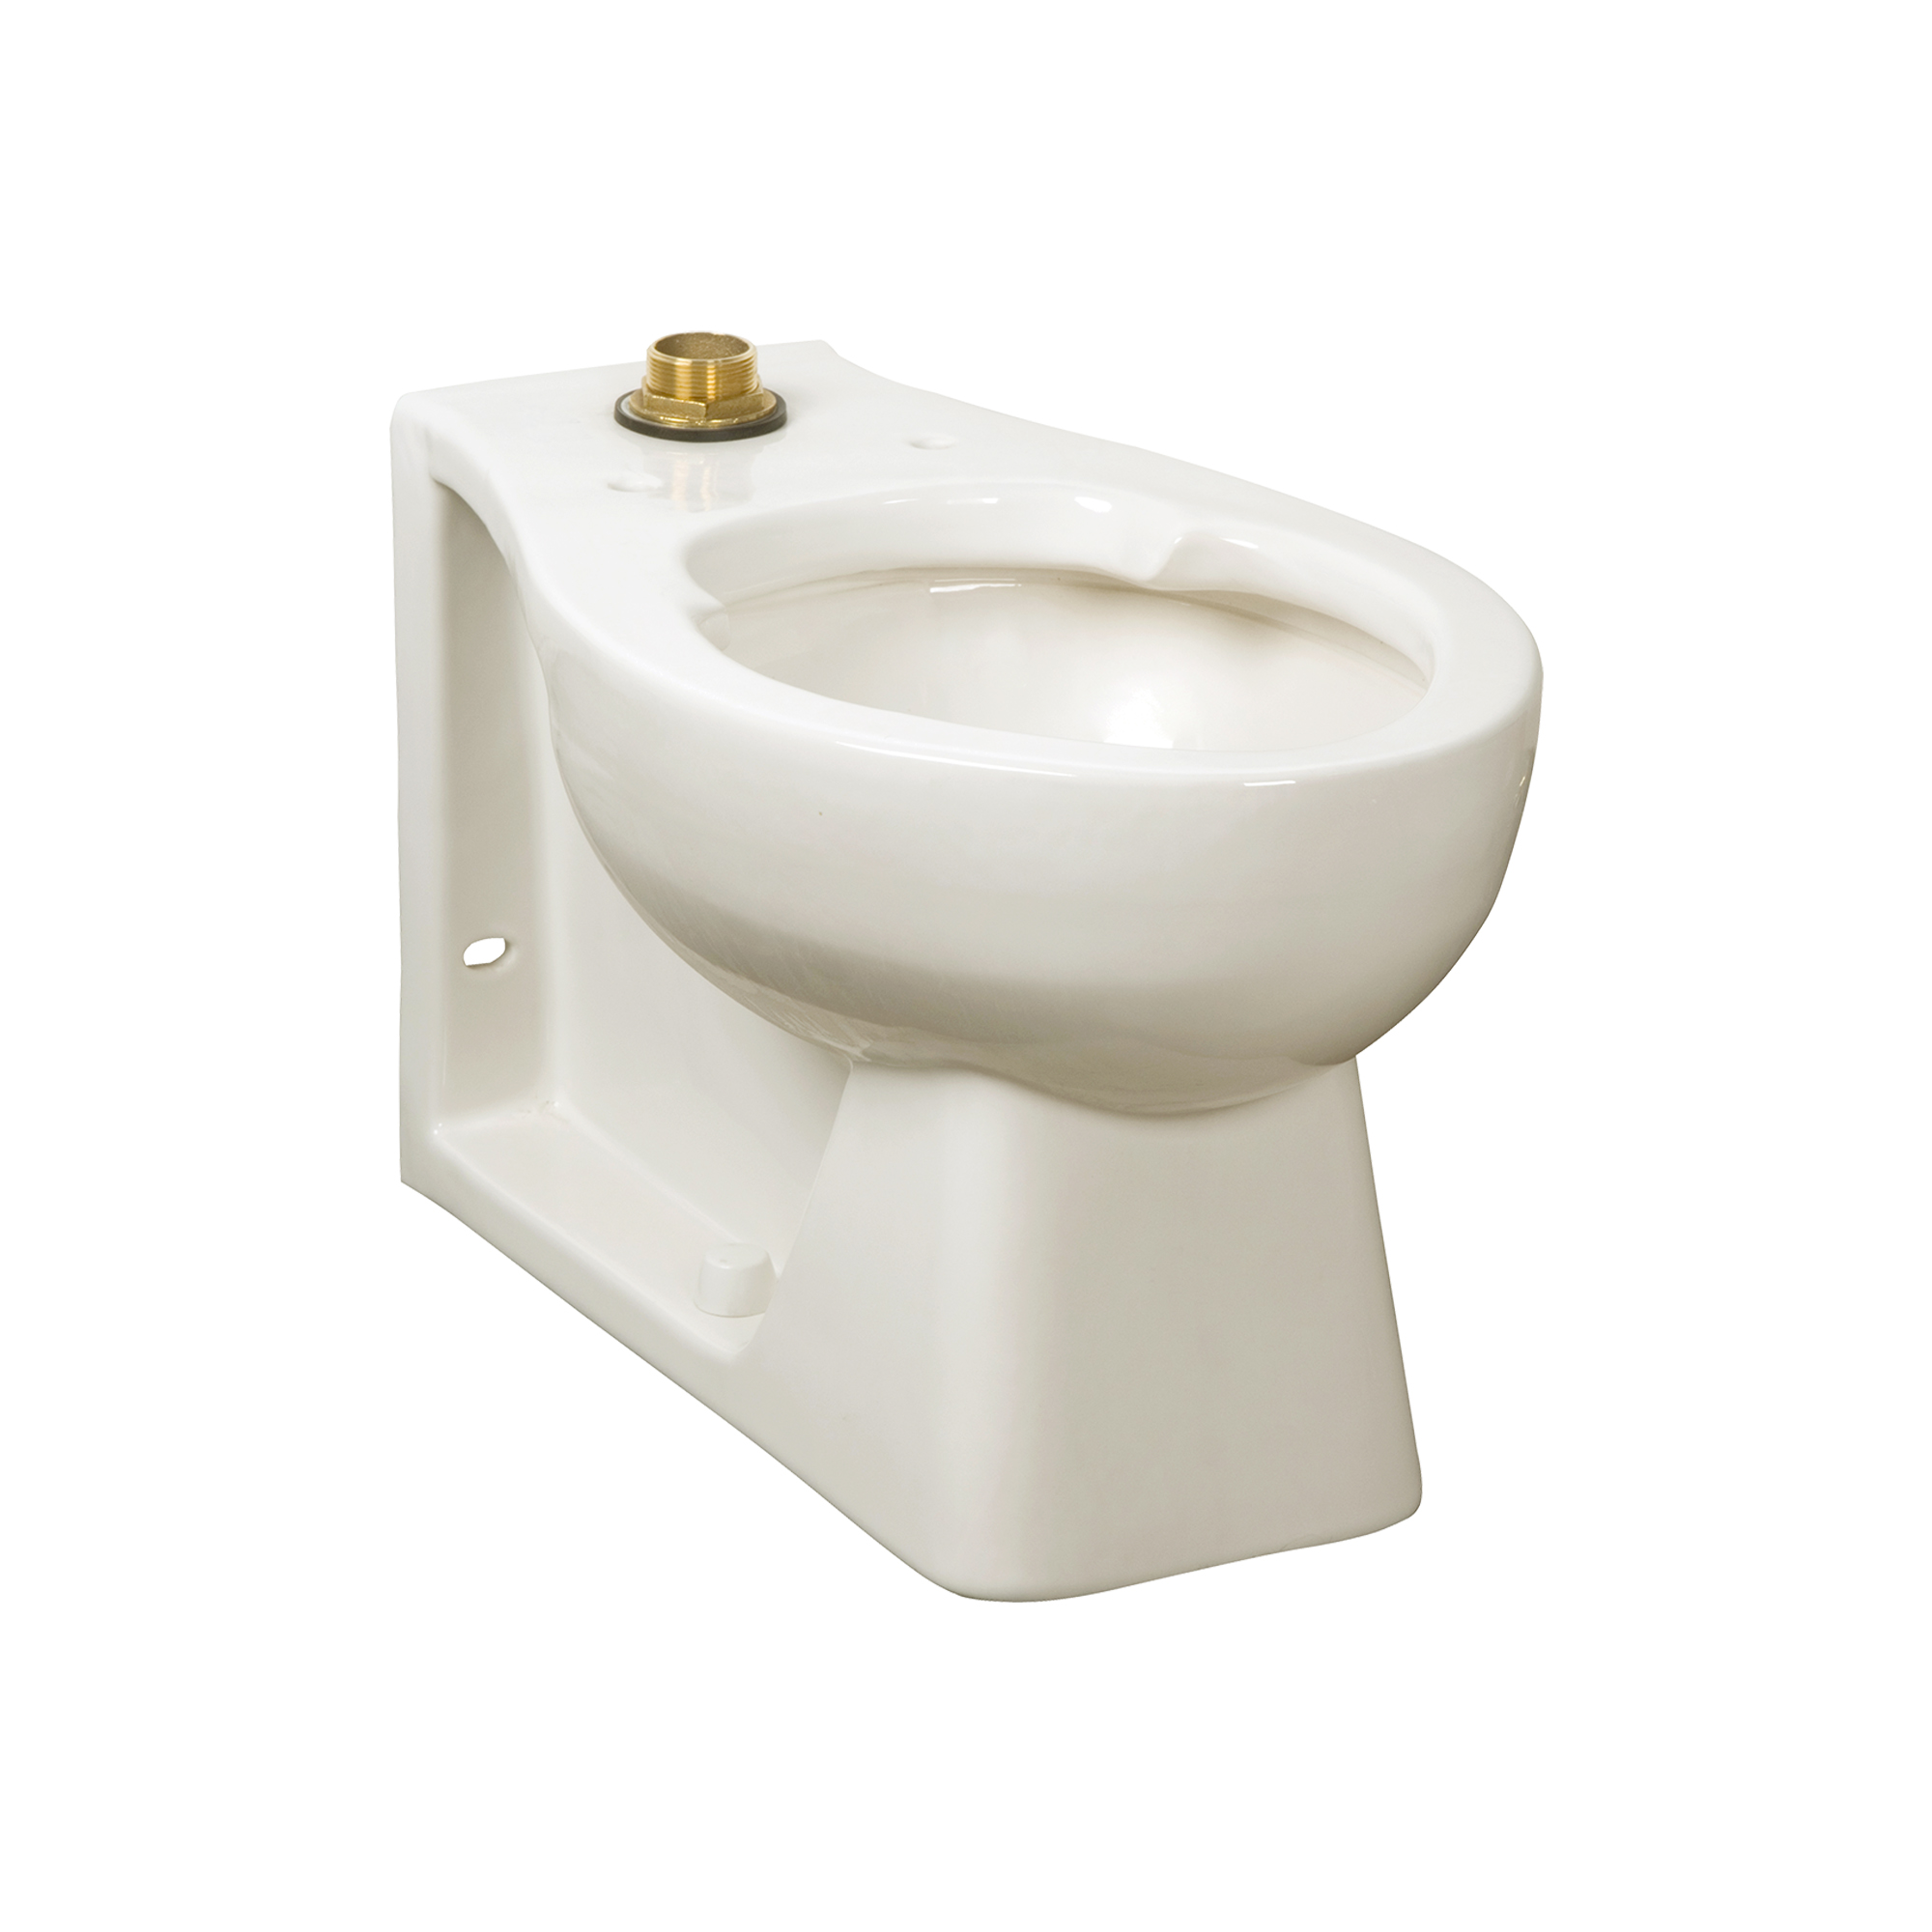 Huron™ 1.28 – 1.6 gpf (4.8 – 6.0 Lpf) Chair Height Top Spud Back Outlet Elongated EverClean™ Bowl